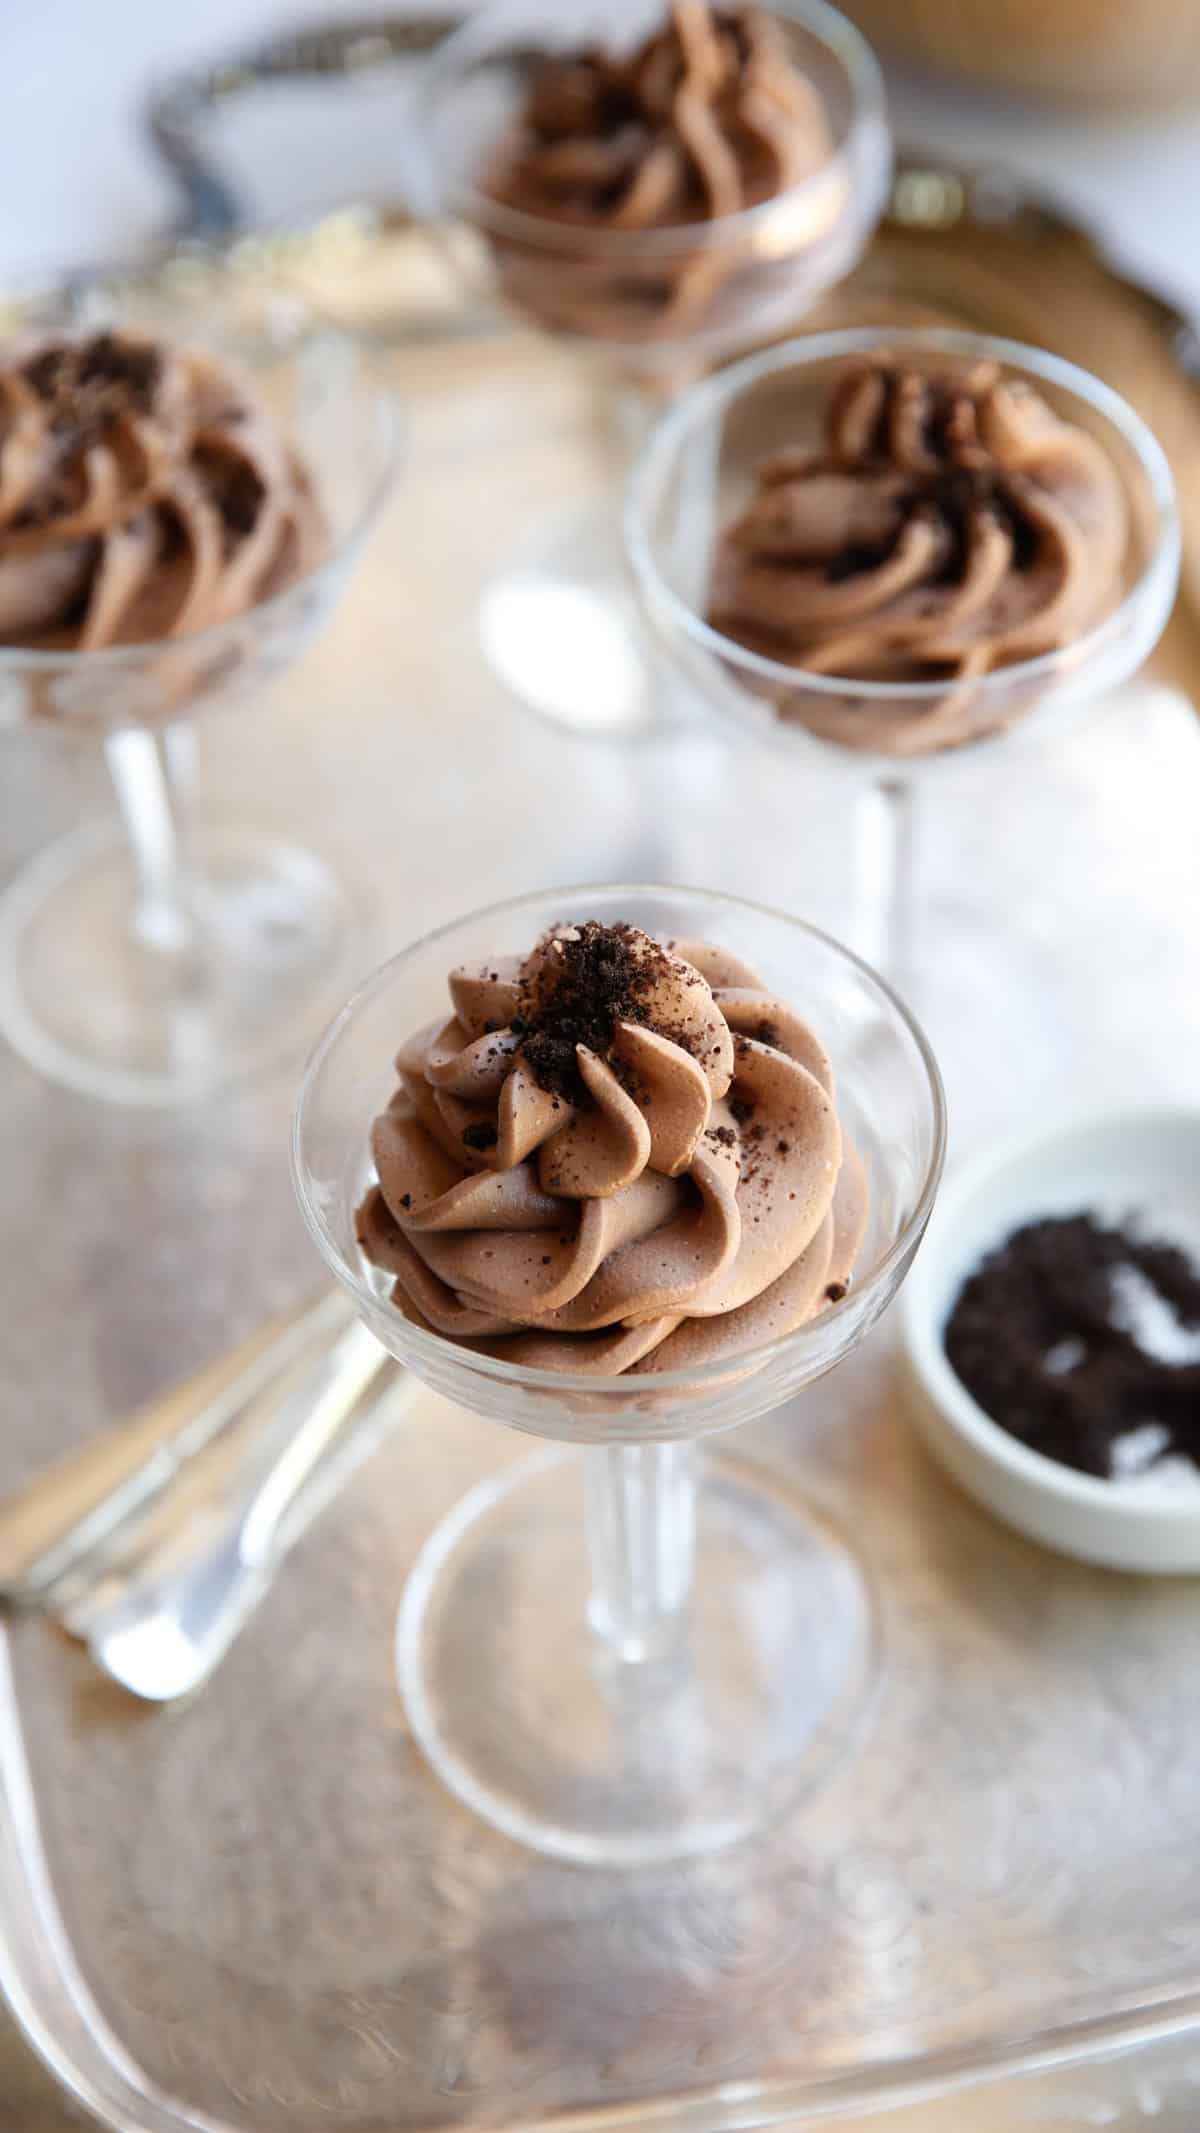 champagne glasses filled with chocolate mousse on a silver tray